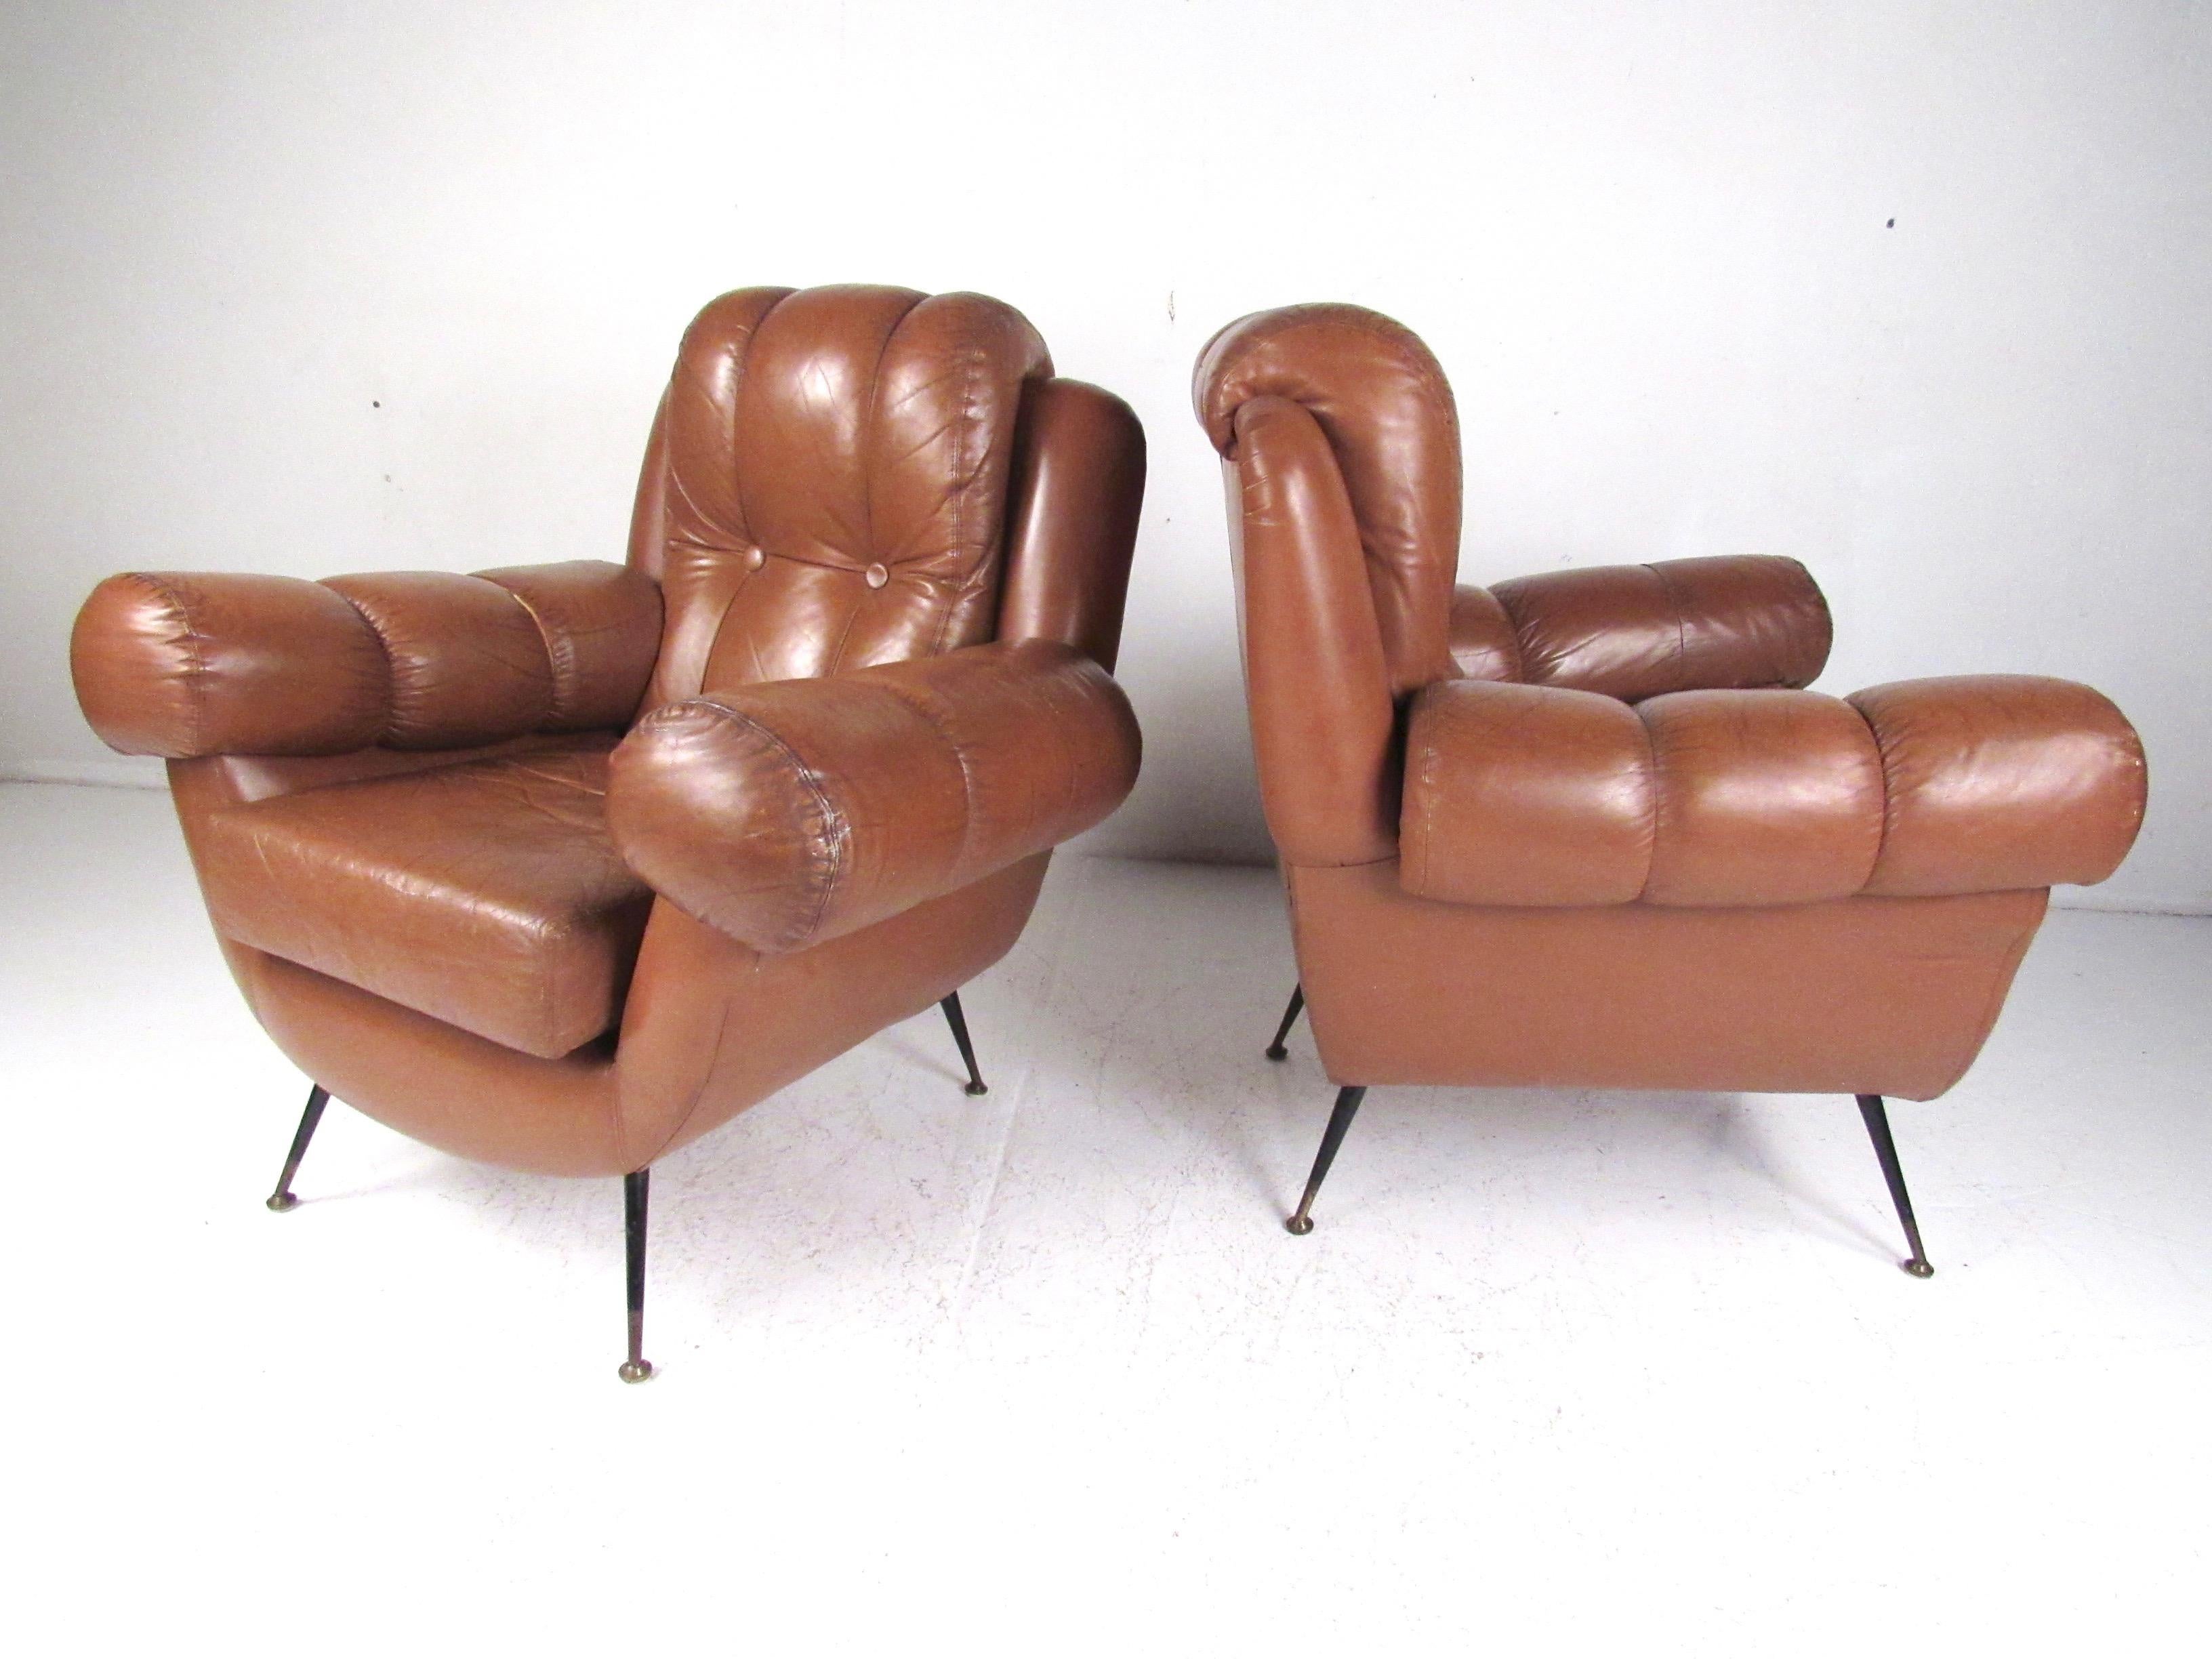 This impressive pair of vintage modern club chairs features tufted leather upholstery, tapered metal legs, and plush padded seats. Unique rounded armrests add to both comfort and Italian modern style of the pair. Please confirm item location (NY or